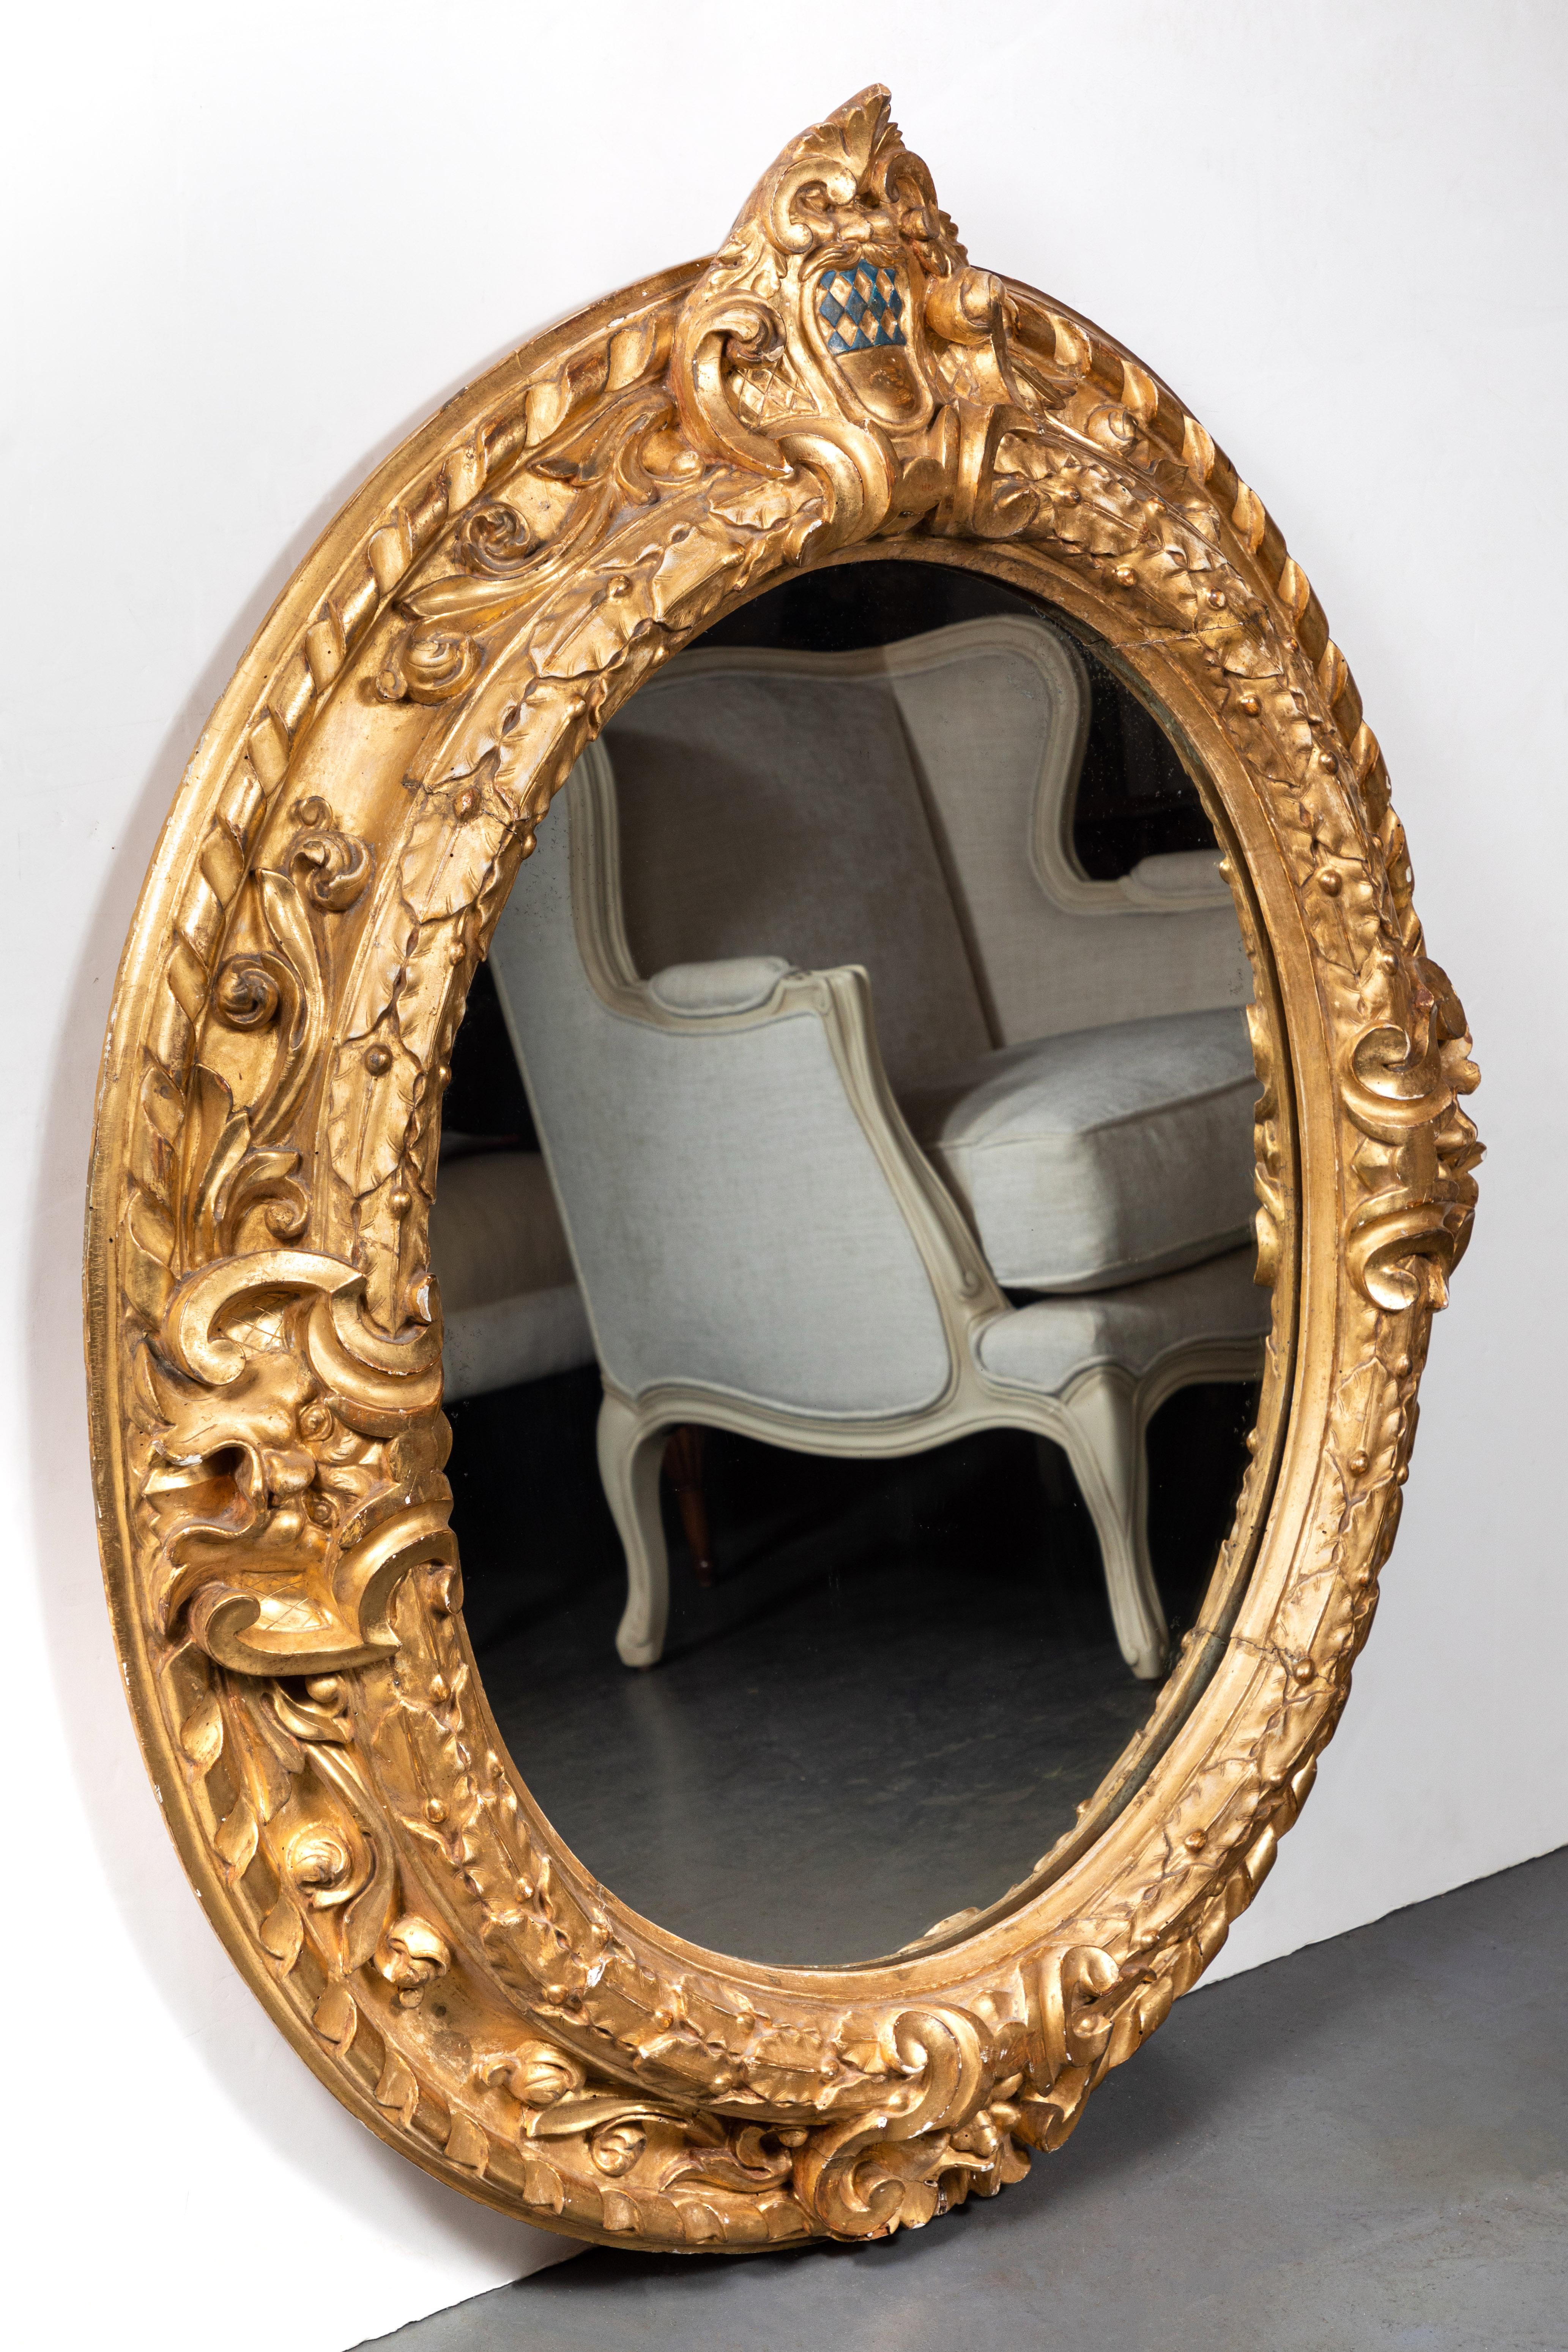 Large, hand carved and 22-karat gold gilded, Italian, oval frame with newer inset mirror. The crown featuring a hand painted crest with a quilted pattern of green diamonds. The whole embellished with foliate forms throughout.